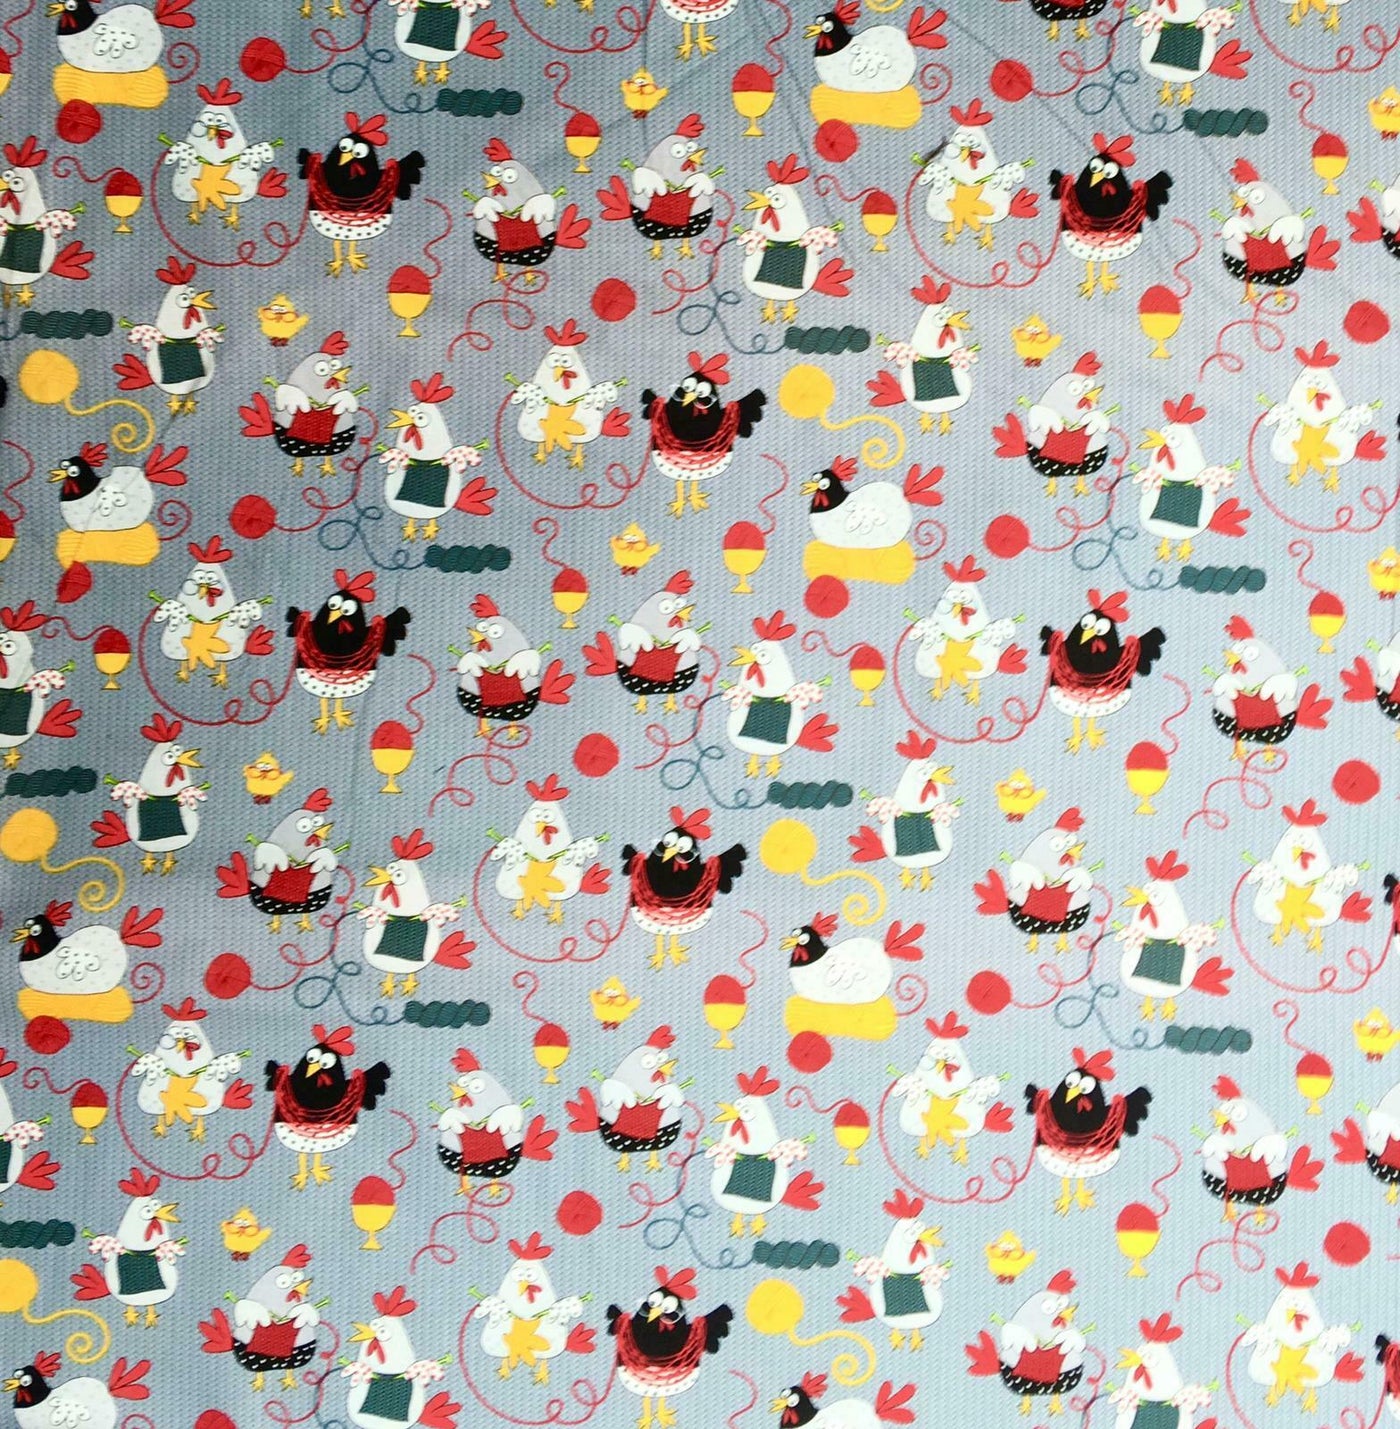 Crazy Knitting Chickens - Timeless Treasures - 100% Cotton Fabric